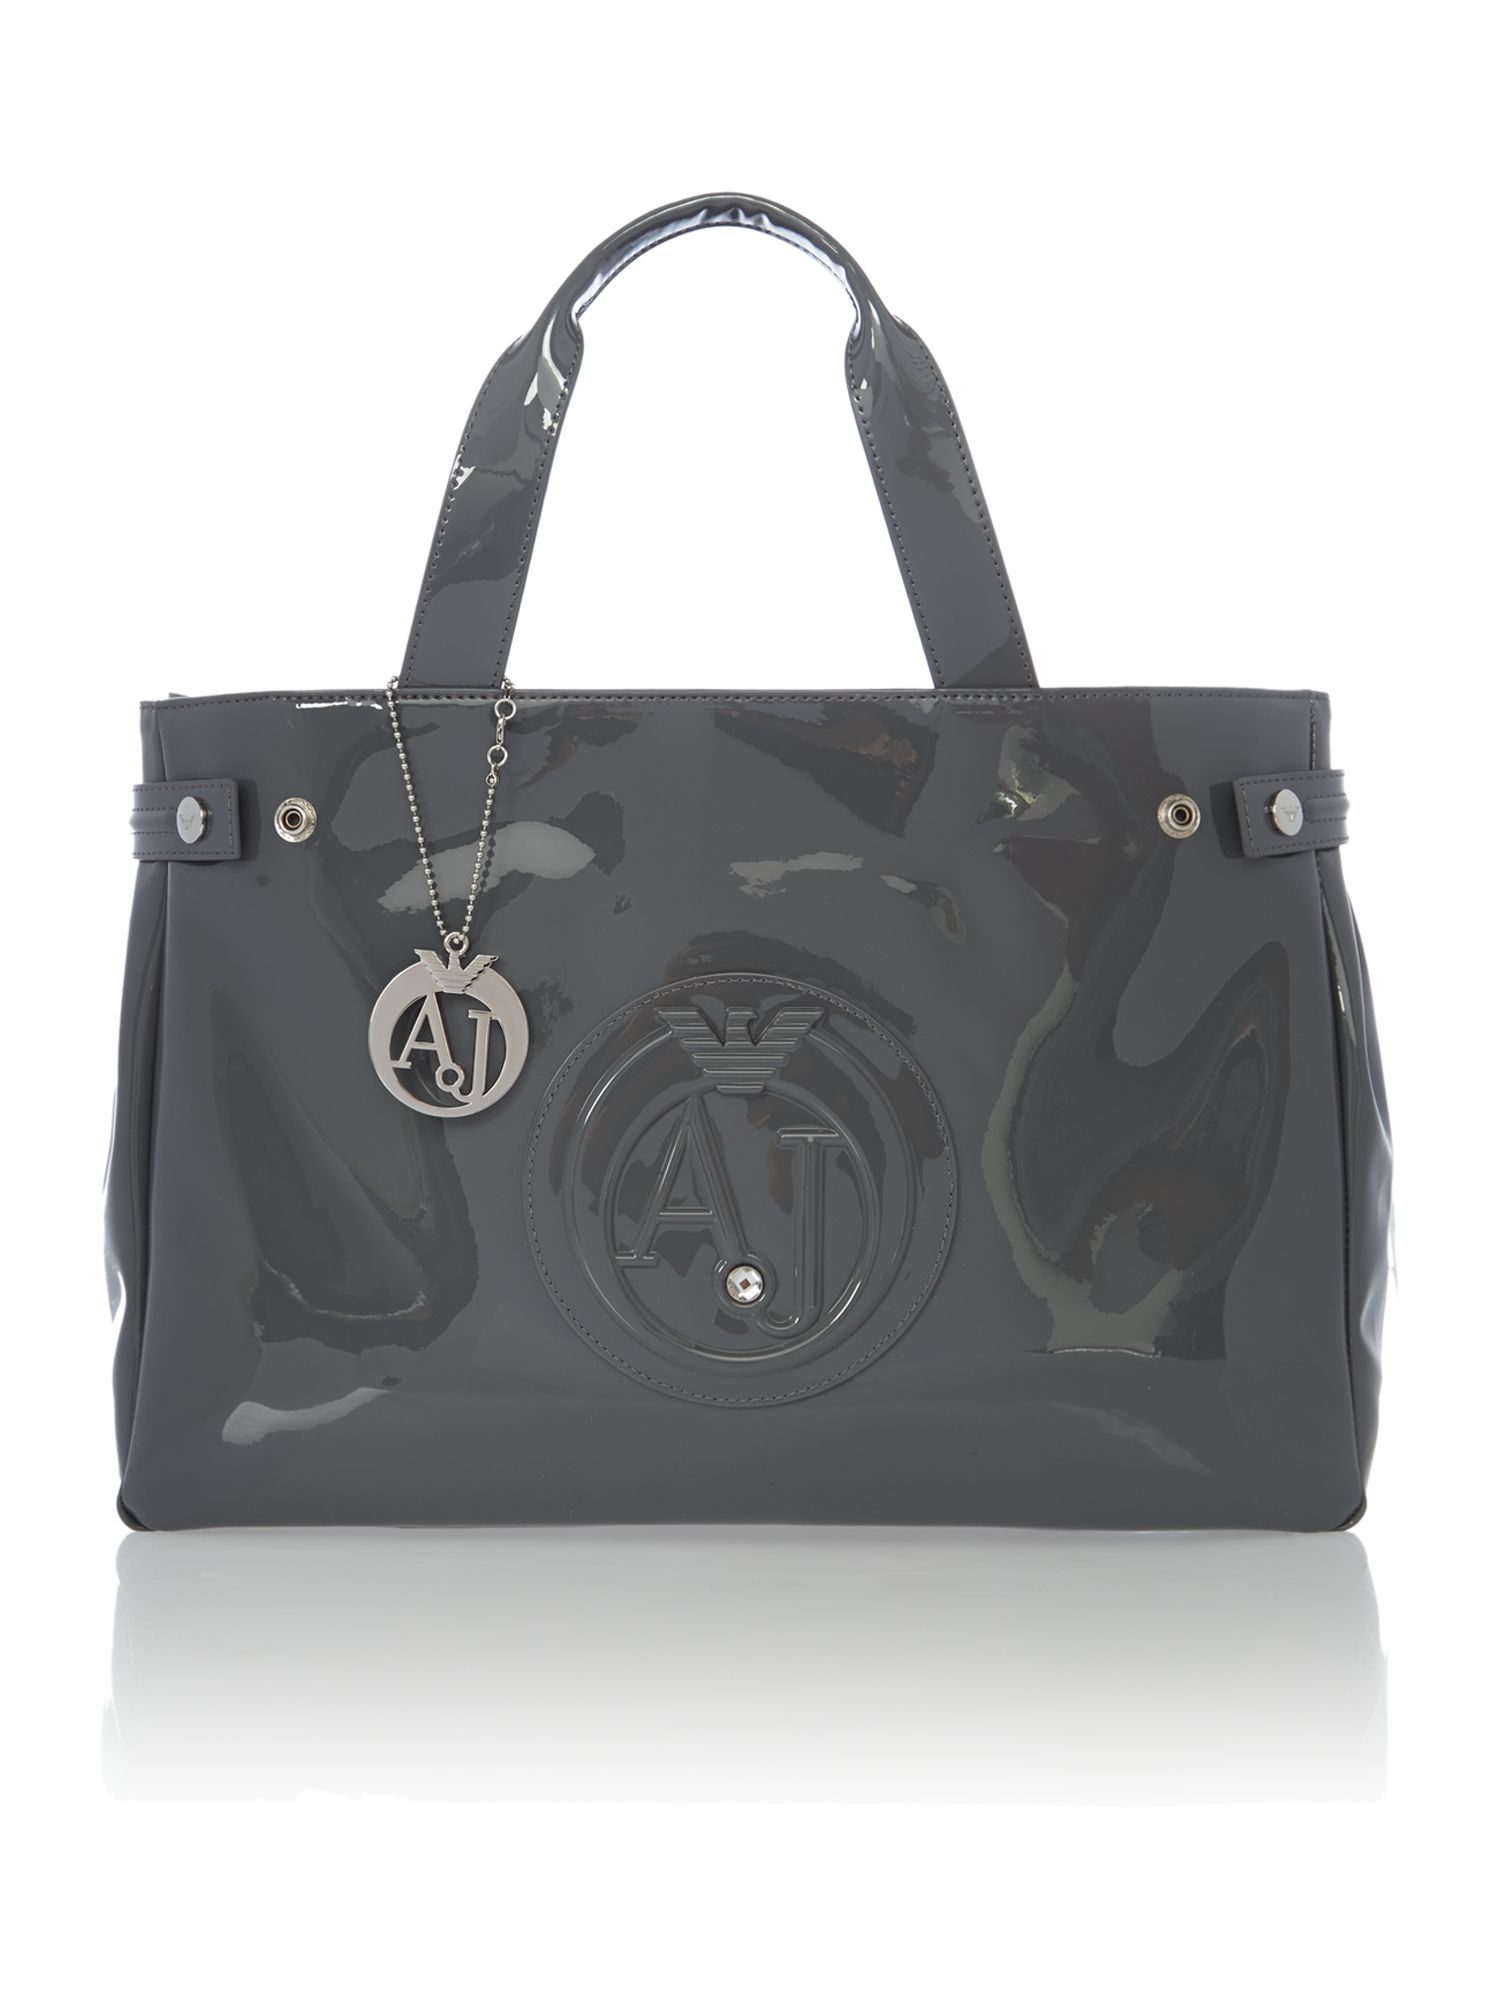 armani bags armani jeans patent grey tote bag - house of fraser HUYBVND